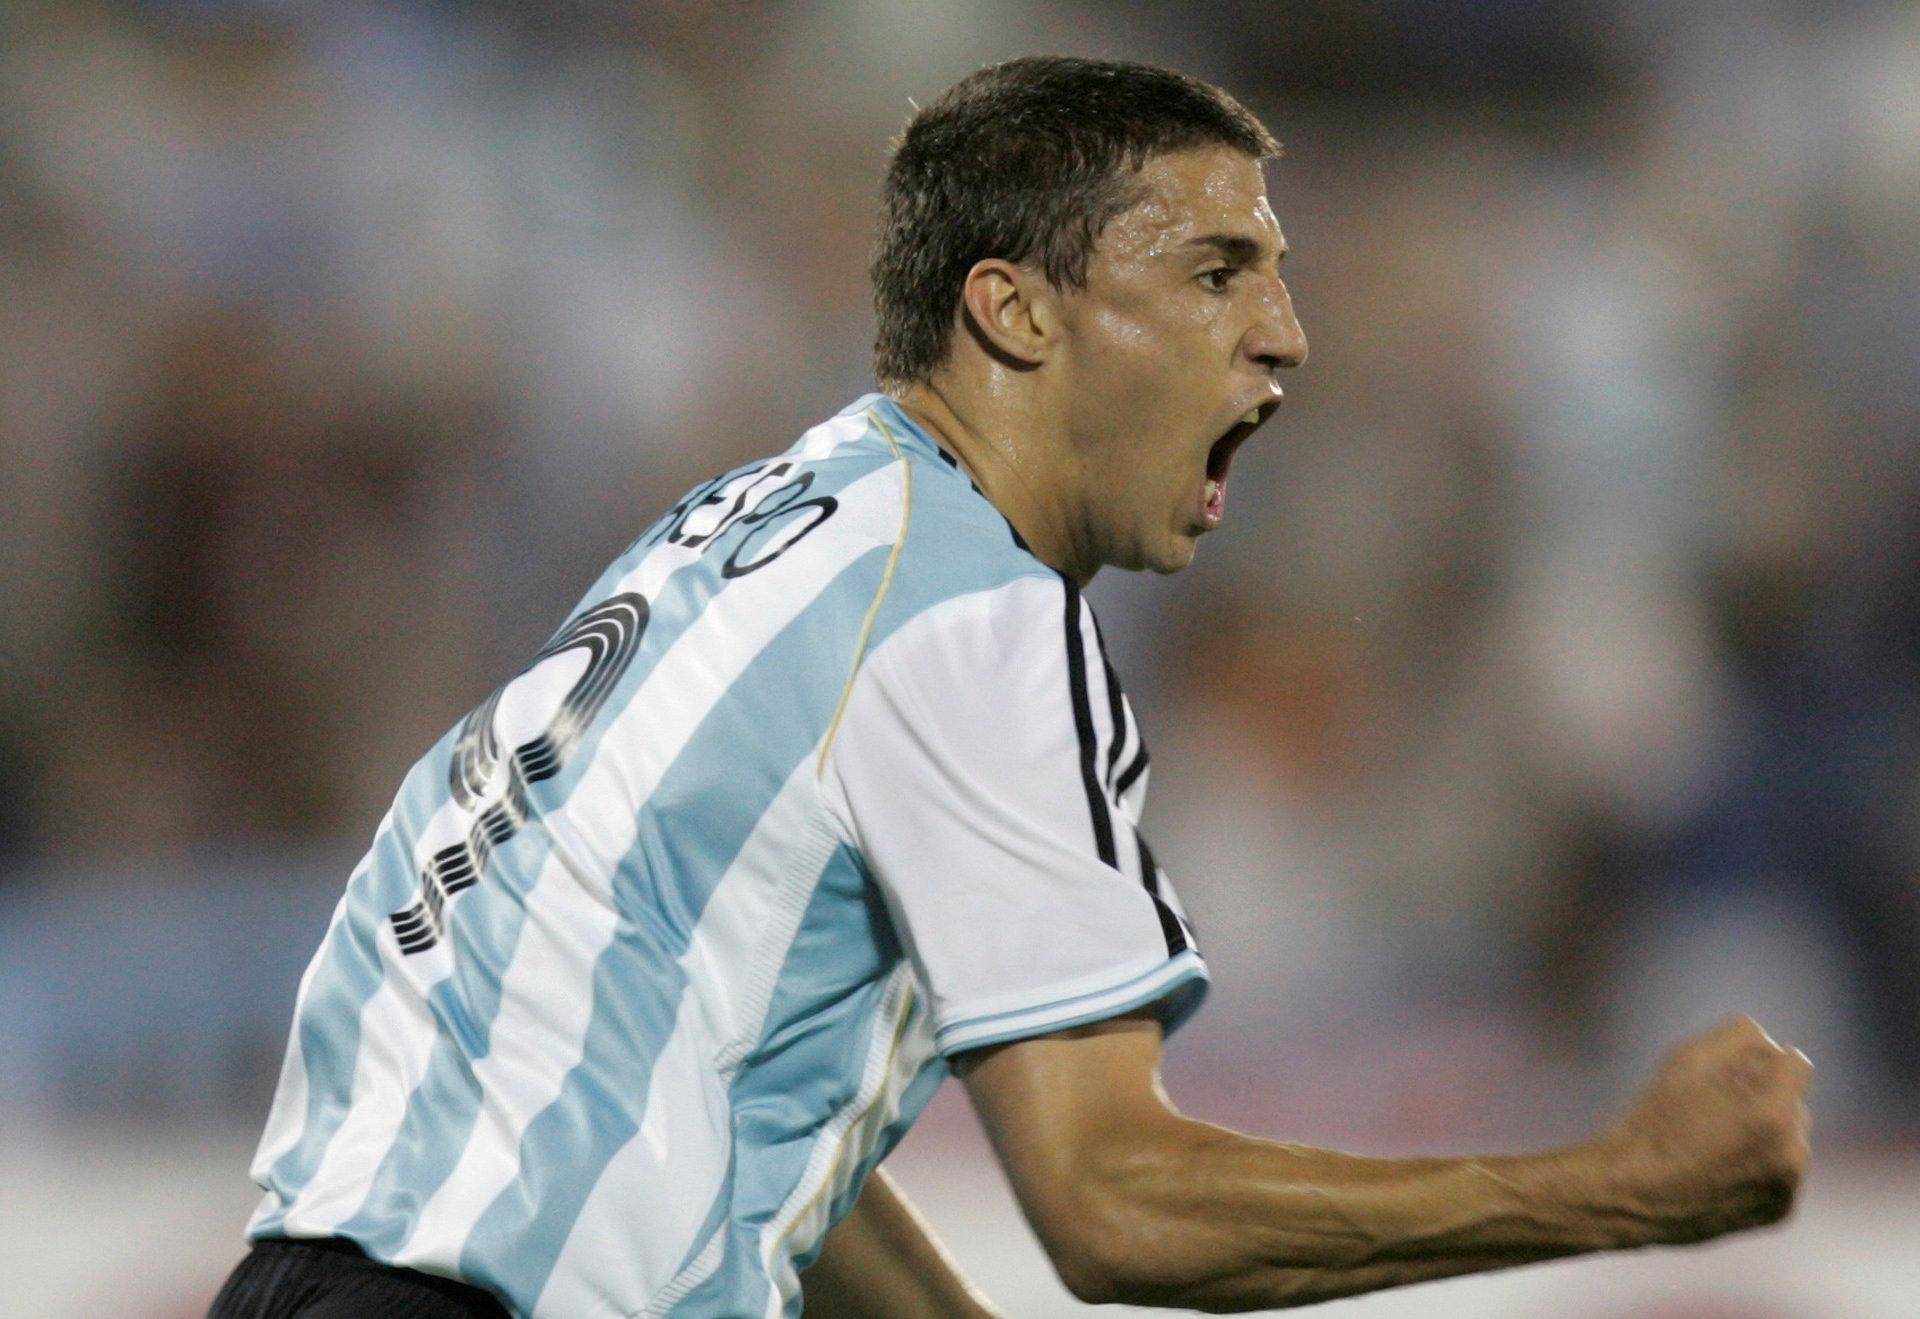 FILE PHOTO: Argentina's Hernan Crespo celebrates after he scores a goal against the USA in Maracaibo